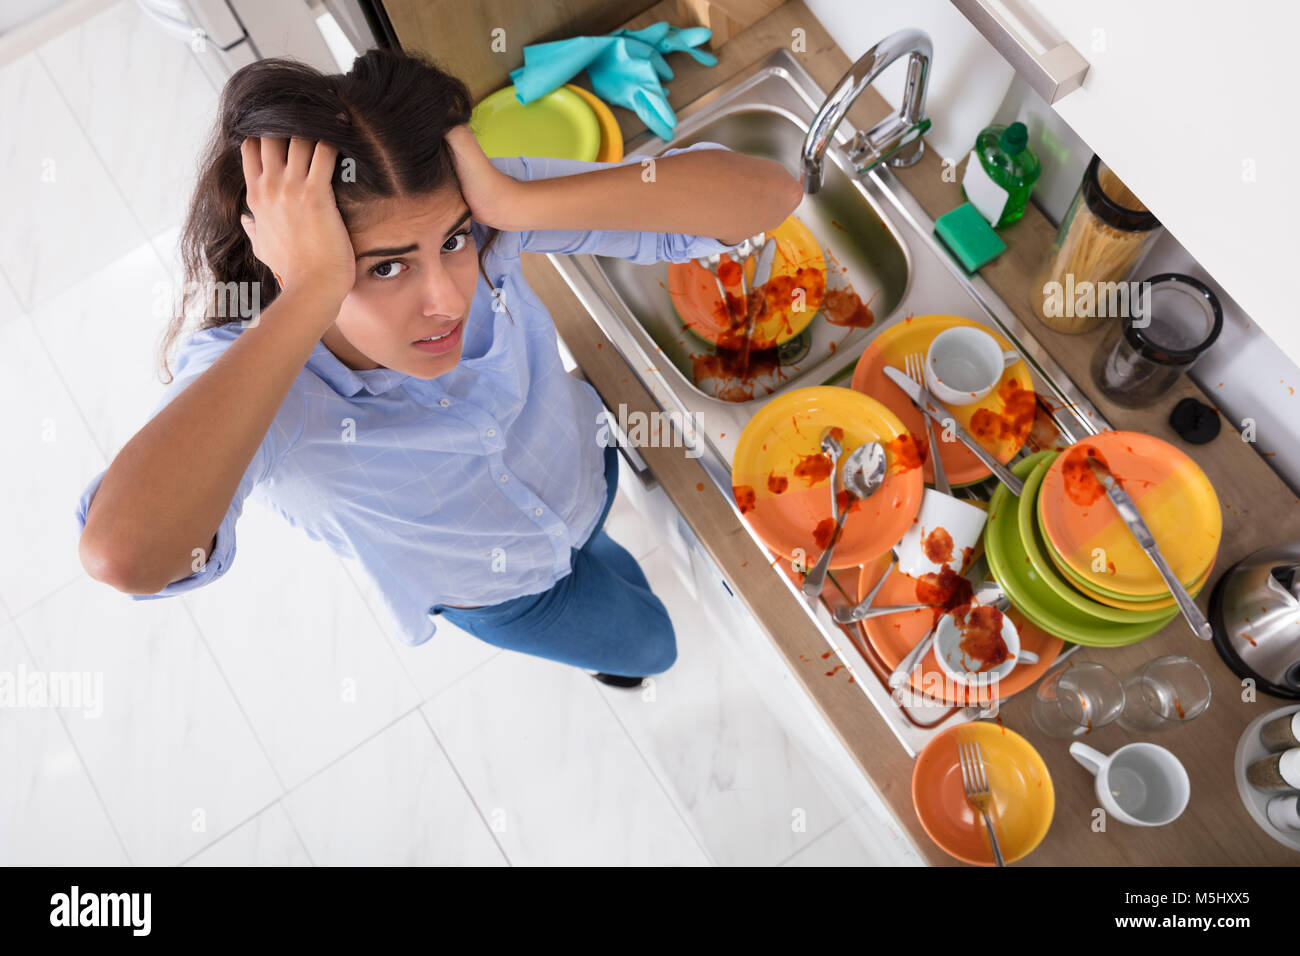 Frustrated Young Woman Standing Near Messy Utensils On Countertop In Kitchen Stock Photo